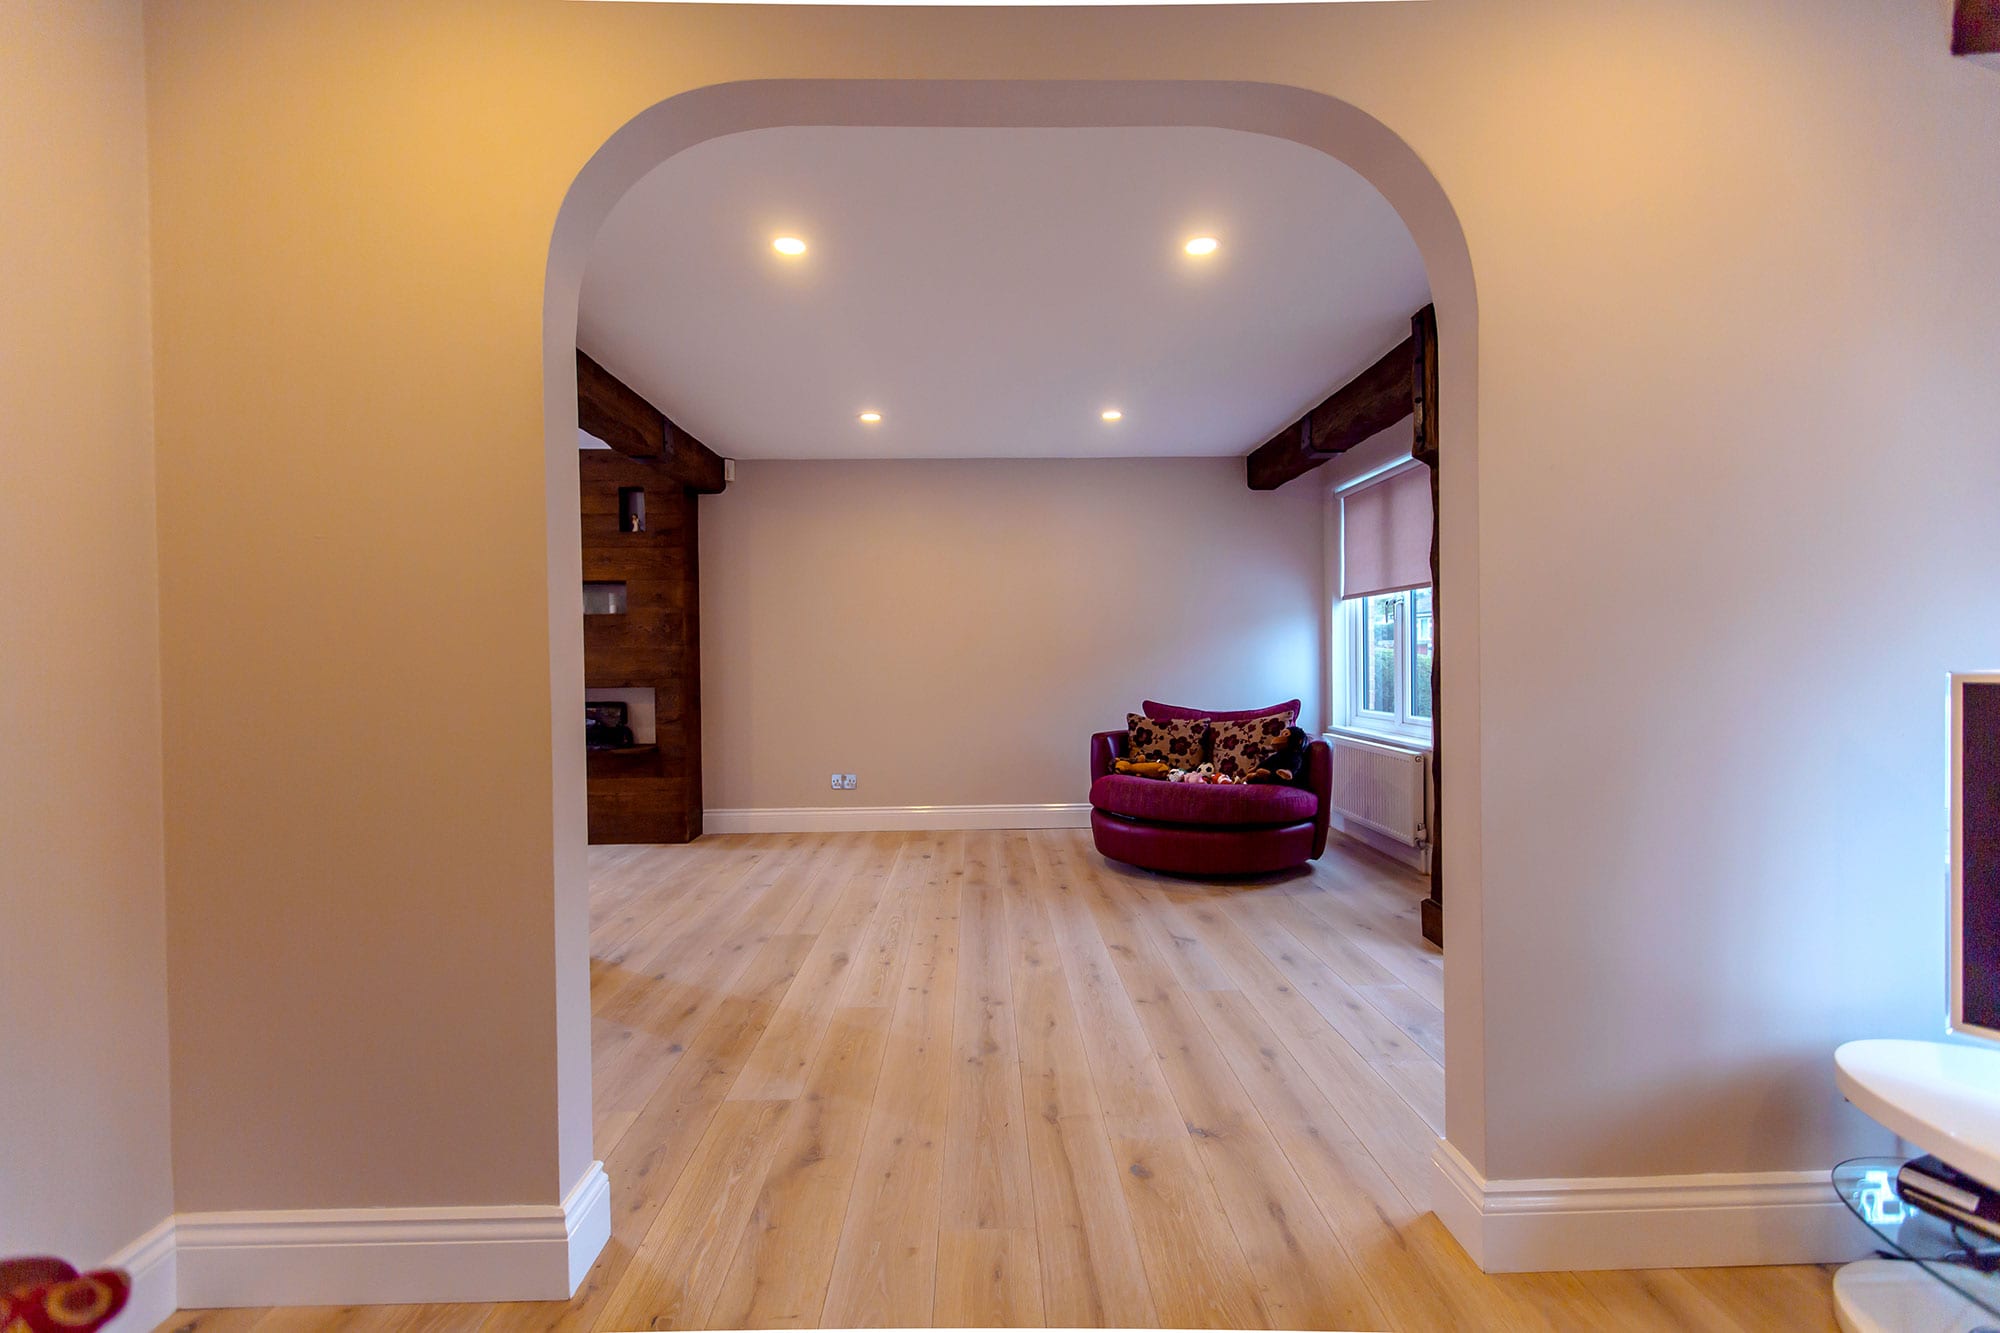 Engineered Wood Flooring Cost, How Much Does It Cost To Install Engineered Wood Flooring Uk